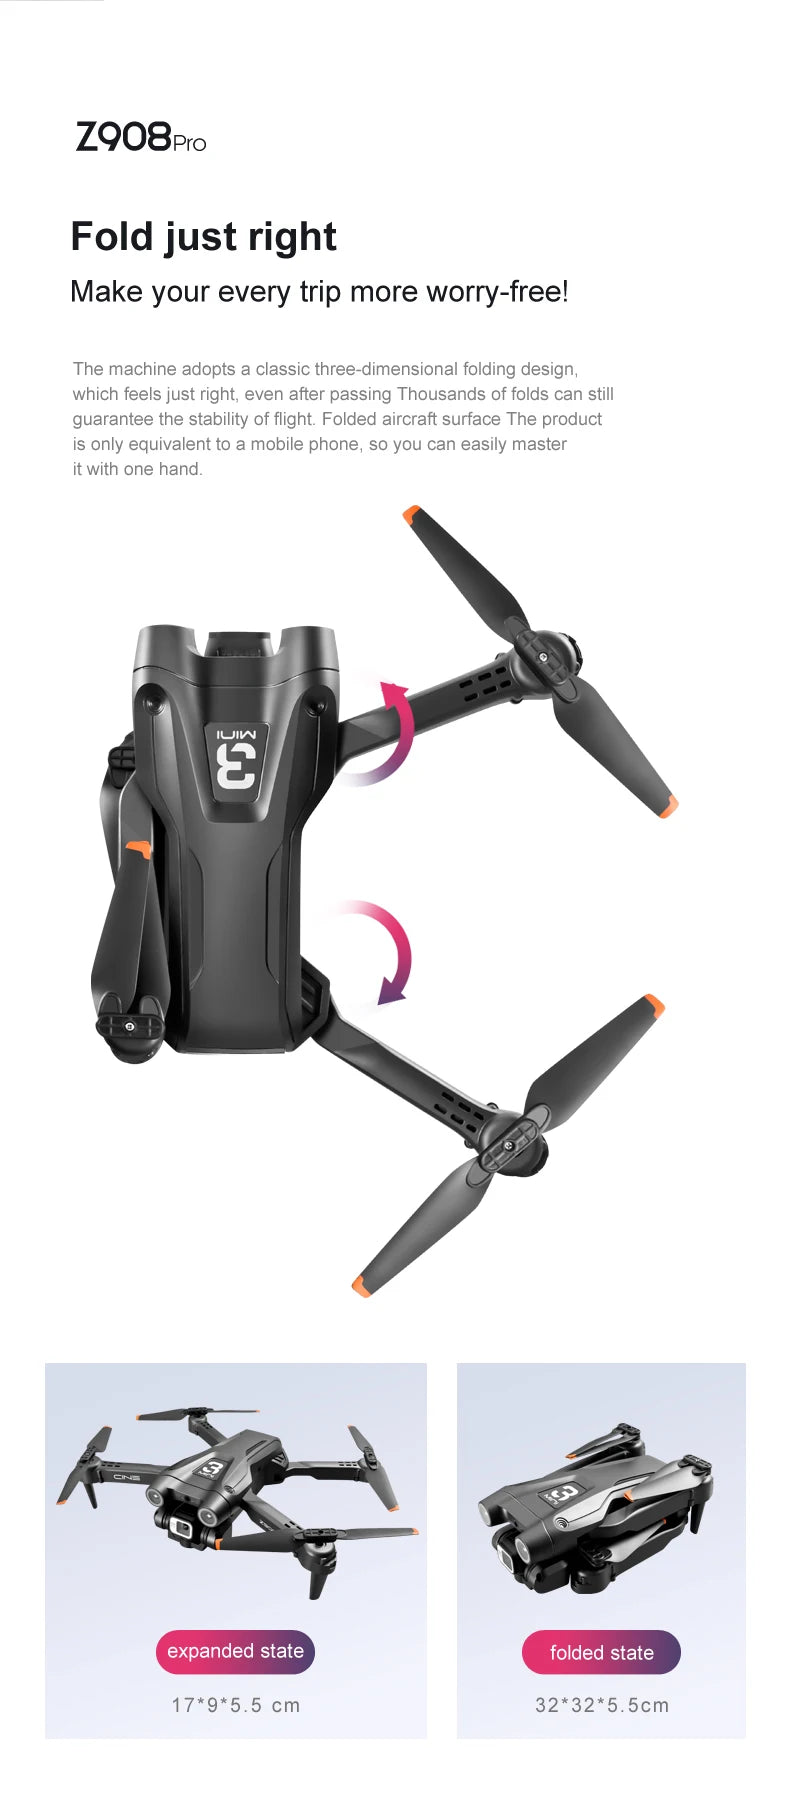 New Z908 Pro Drone, z908pro fold just right makes your every trip more worry